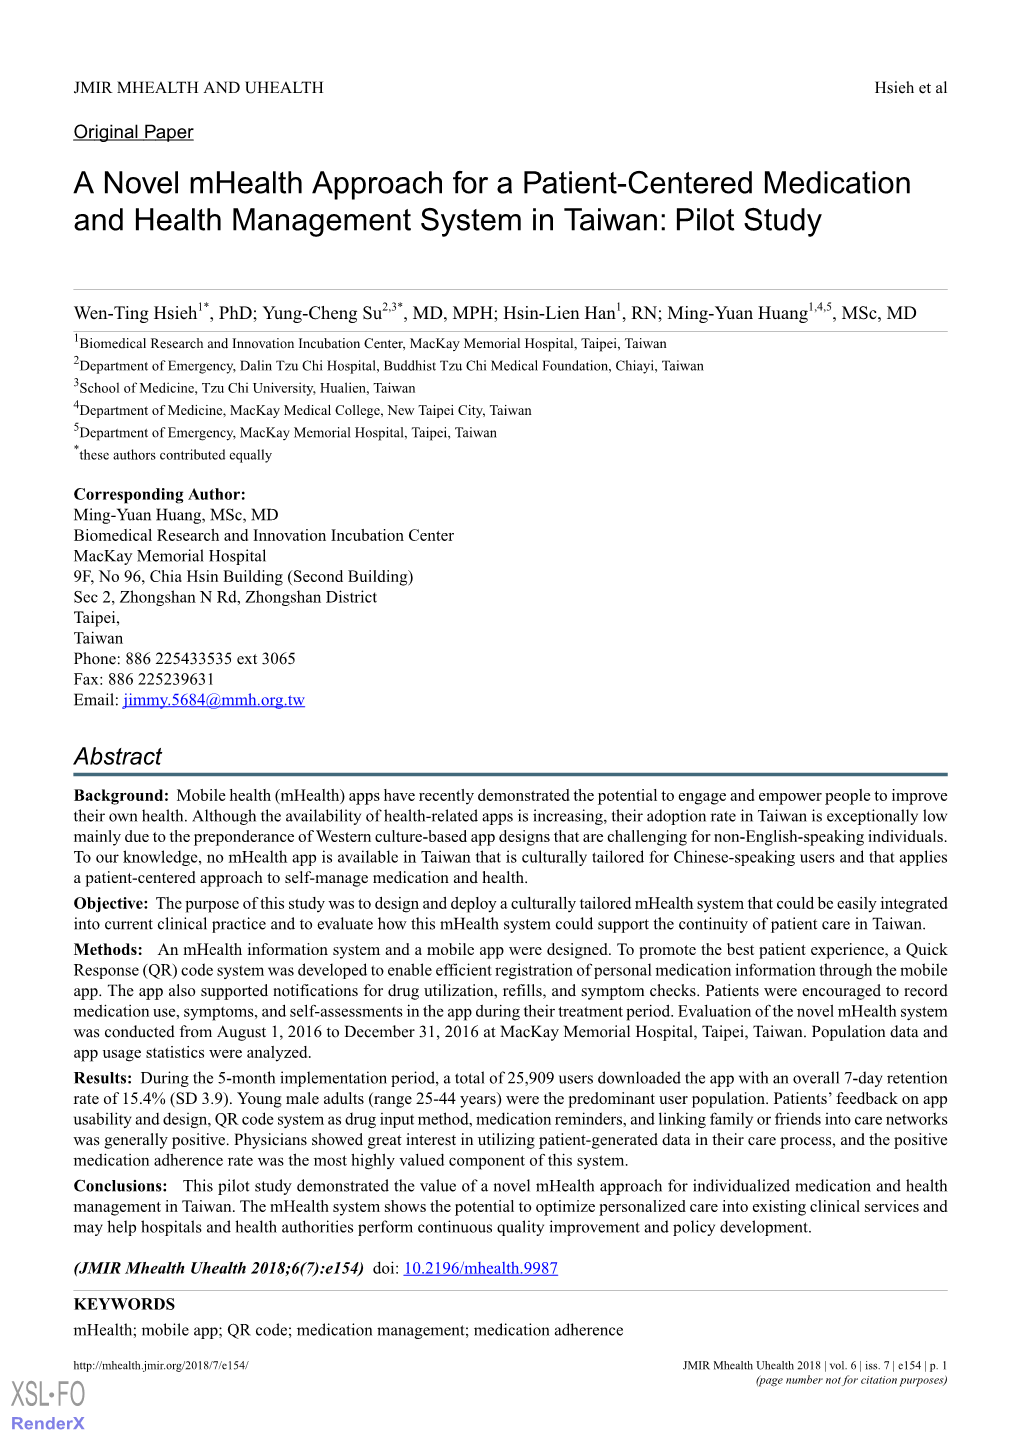 A Novel Mhealth Approach for a Patient-Centered Medication and Health Management System in Taiwan: Pilot Study